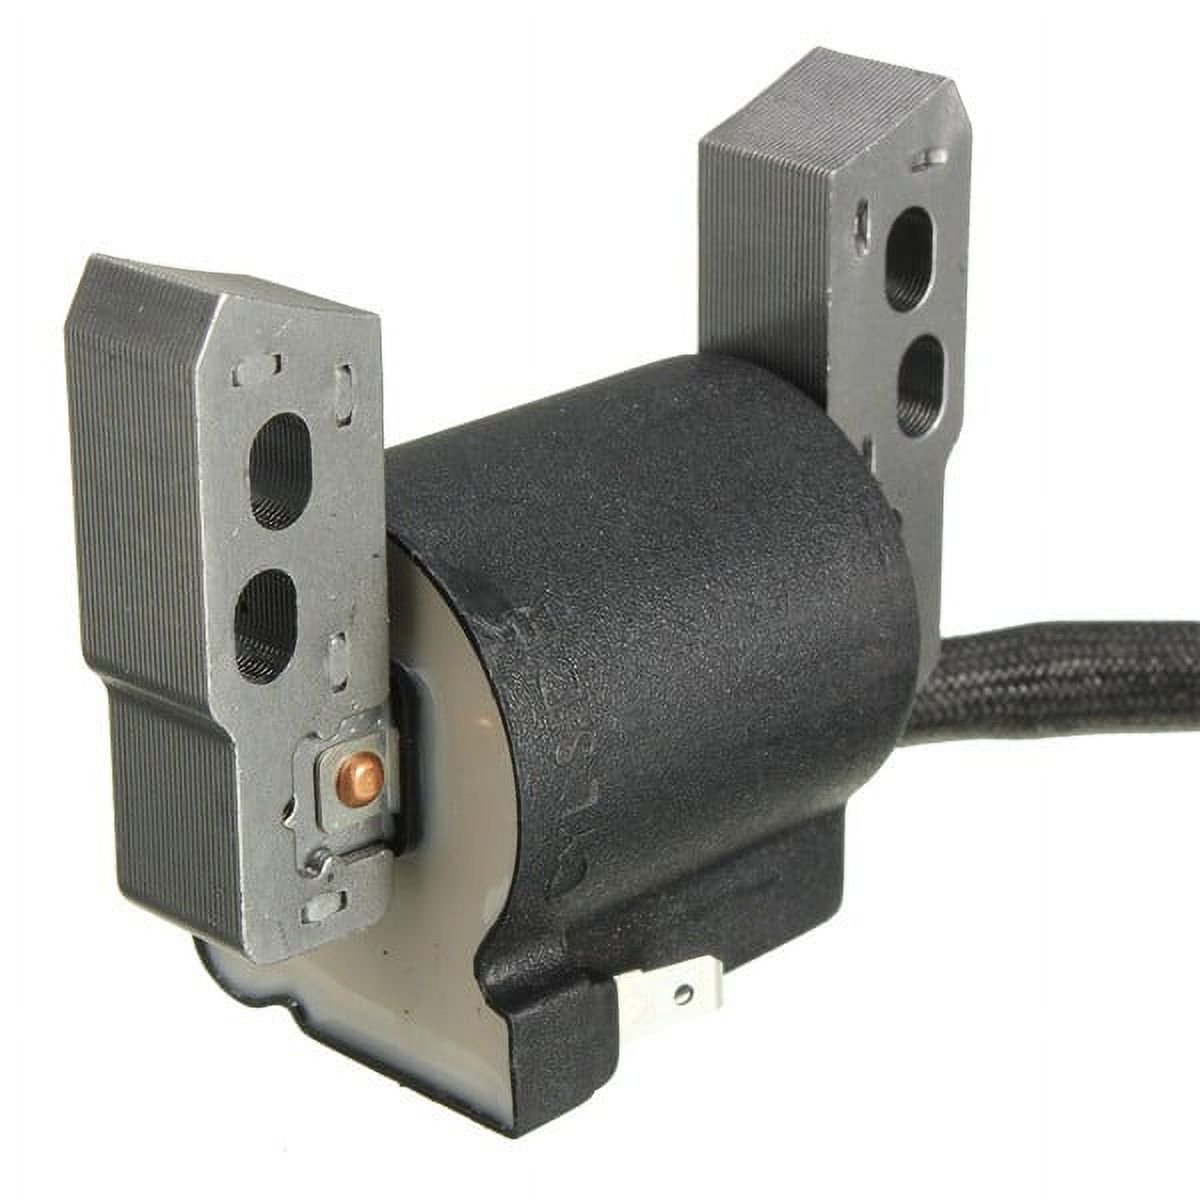 Ignition coil for Briggs& Stratton 695711, 802574, 493237, 796964, 492416 - image 3 of 4